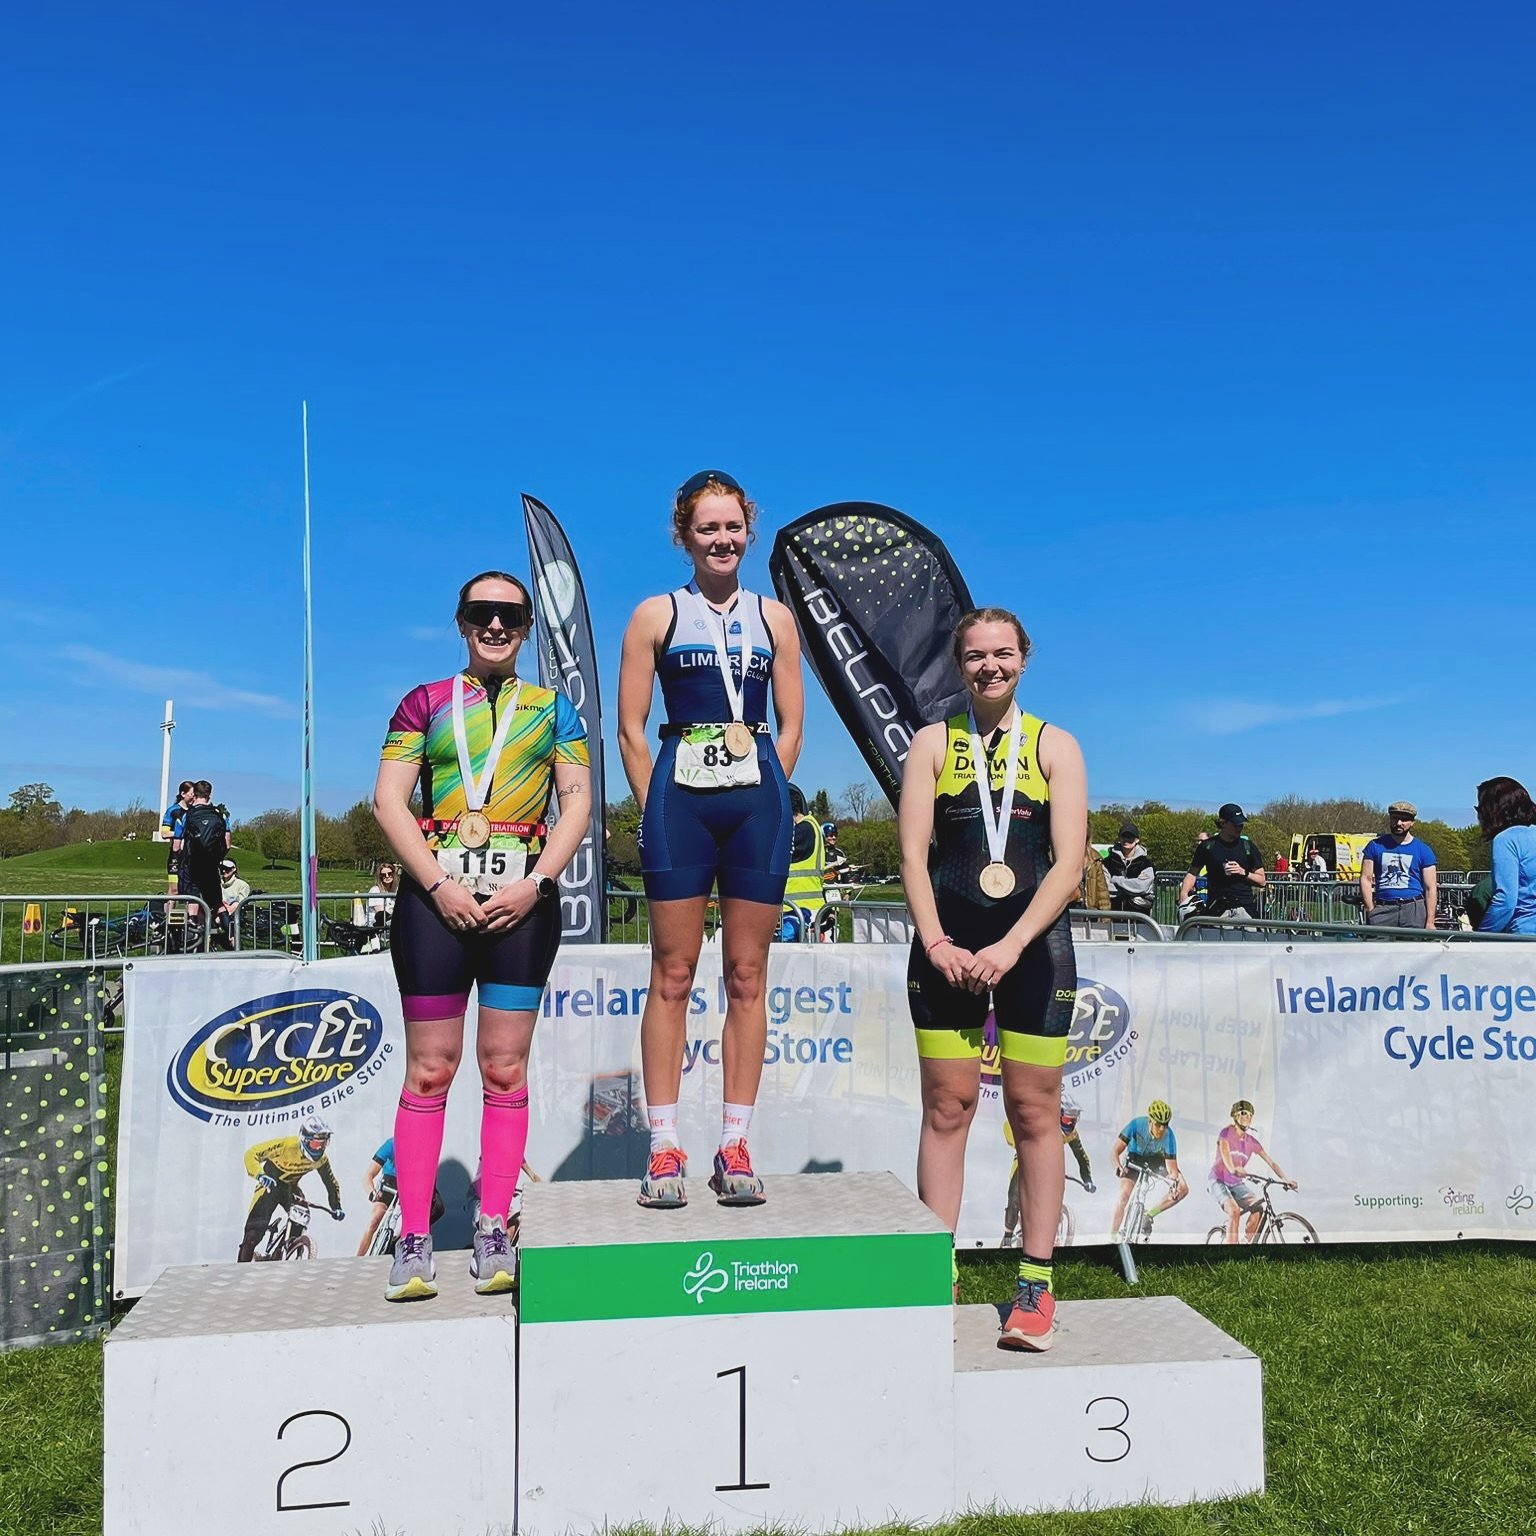 Irish Rocket 🚀 Pockets AG Duathlon champs win 🥇 

@laoisebennis produced a fab performance at the @triathlonireland national duathlon series race winning her 25-29 AG. 
Some strong racing and Great to see Laoise holding her own in a good field &amp